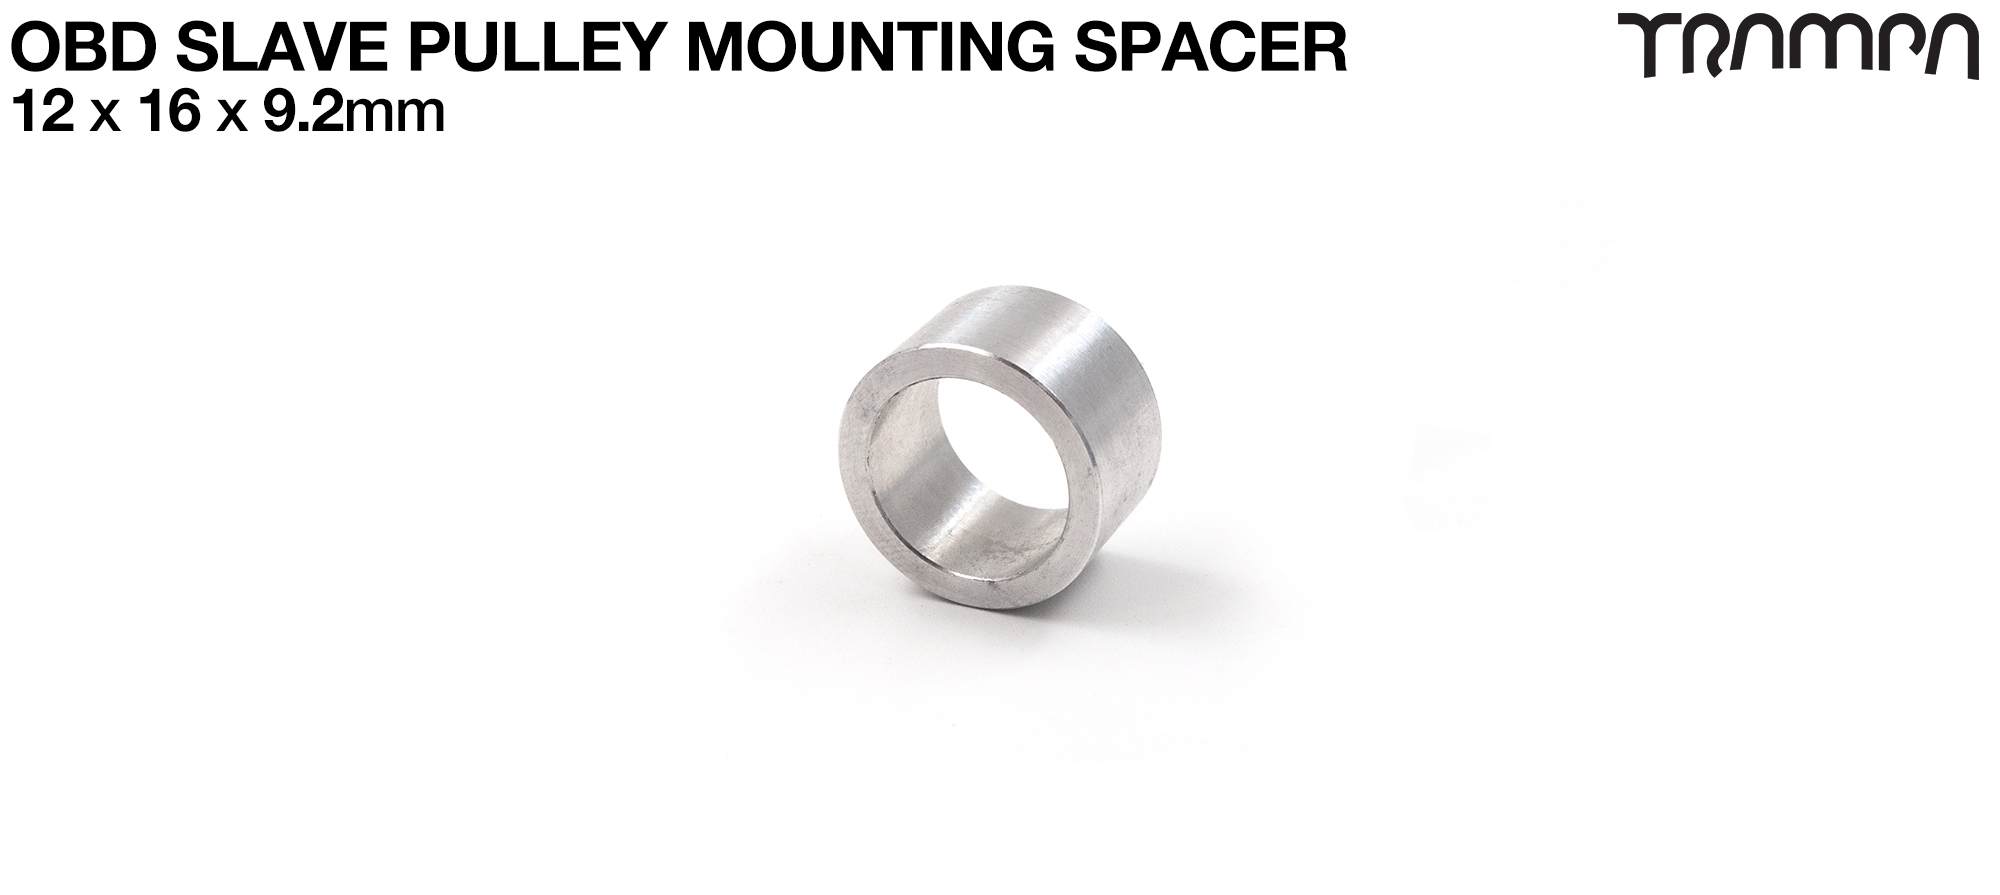 12 x 16 x 9.2mm - OBD Slave Pulley mounting spacer